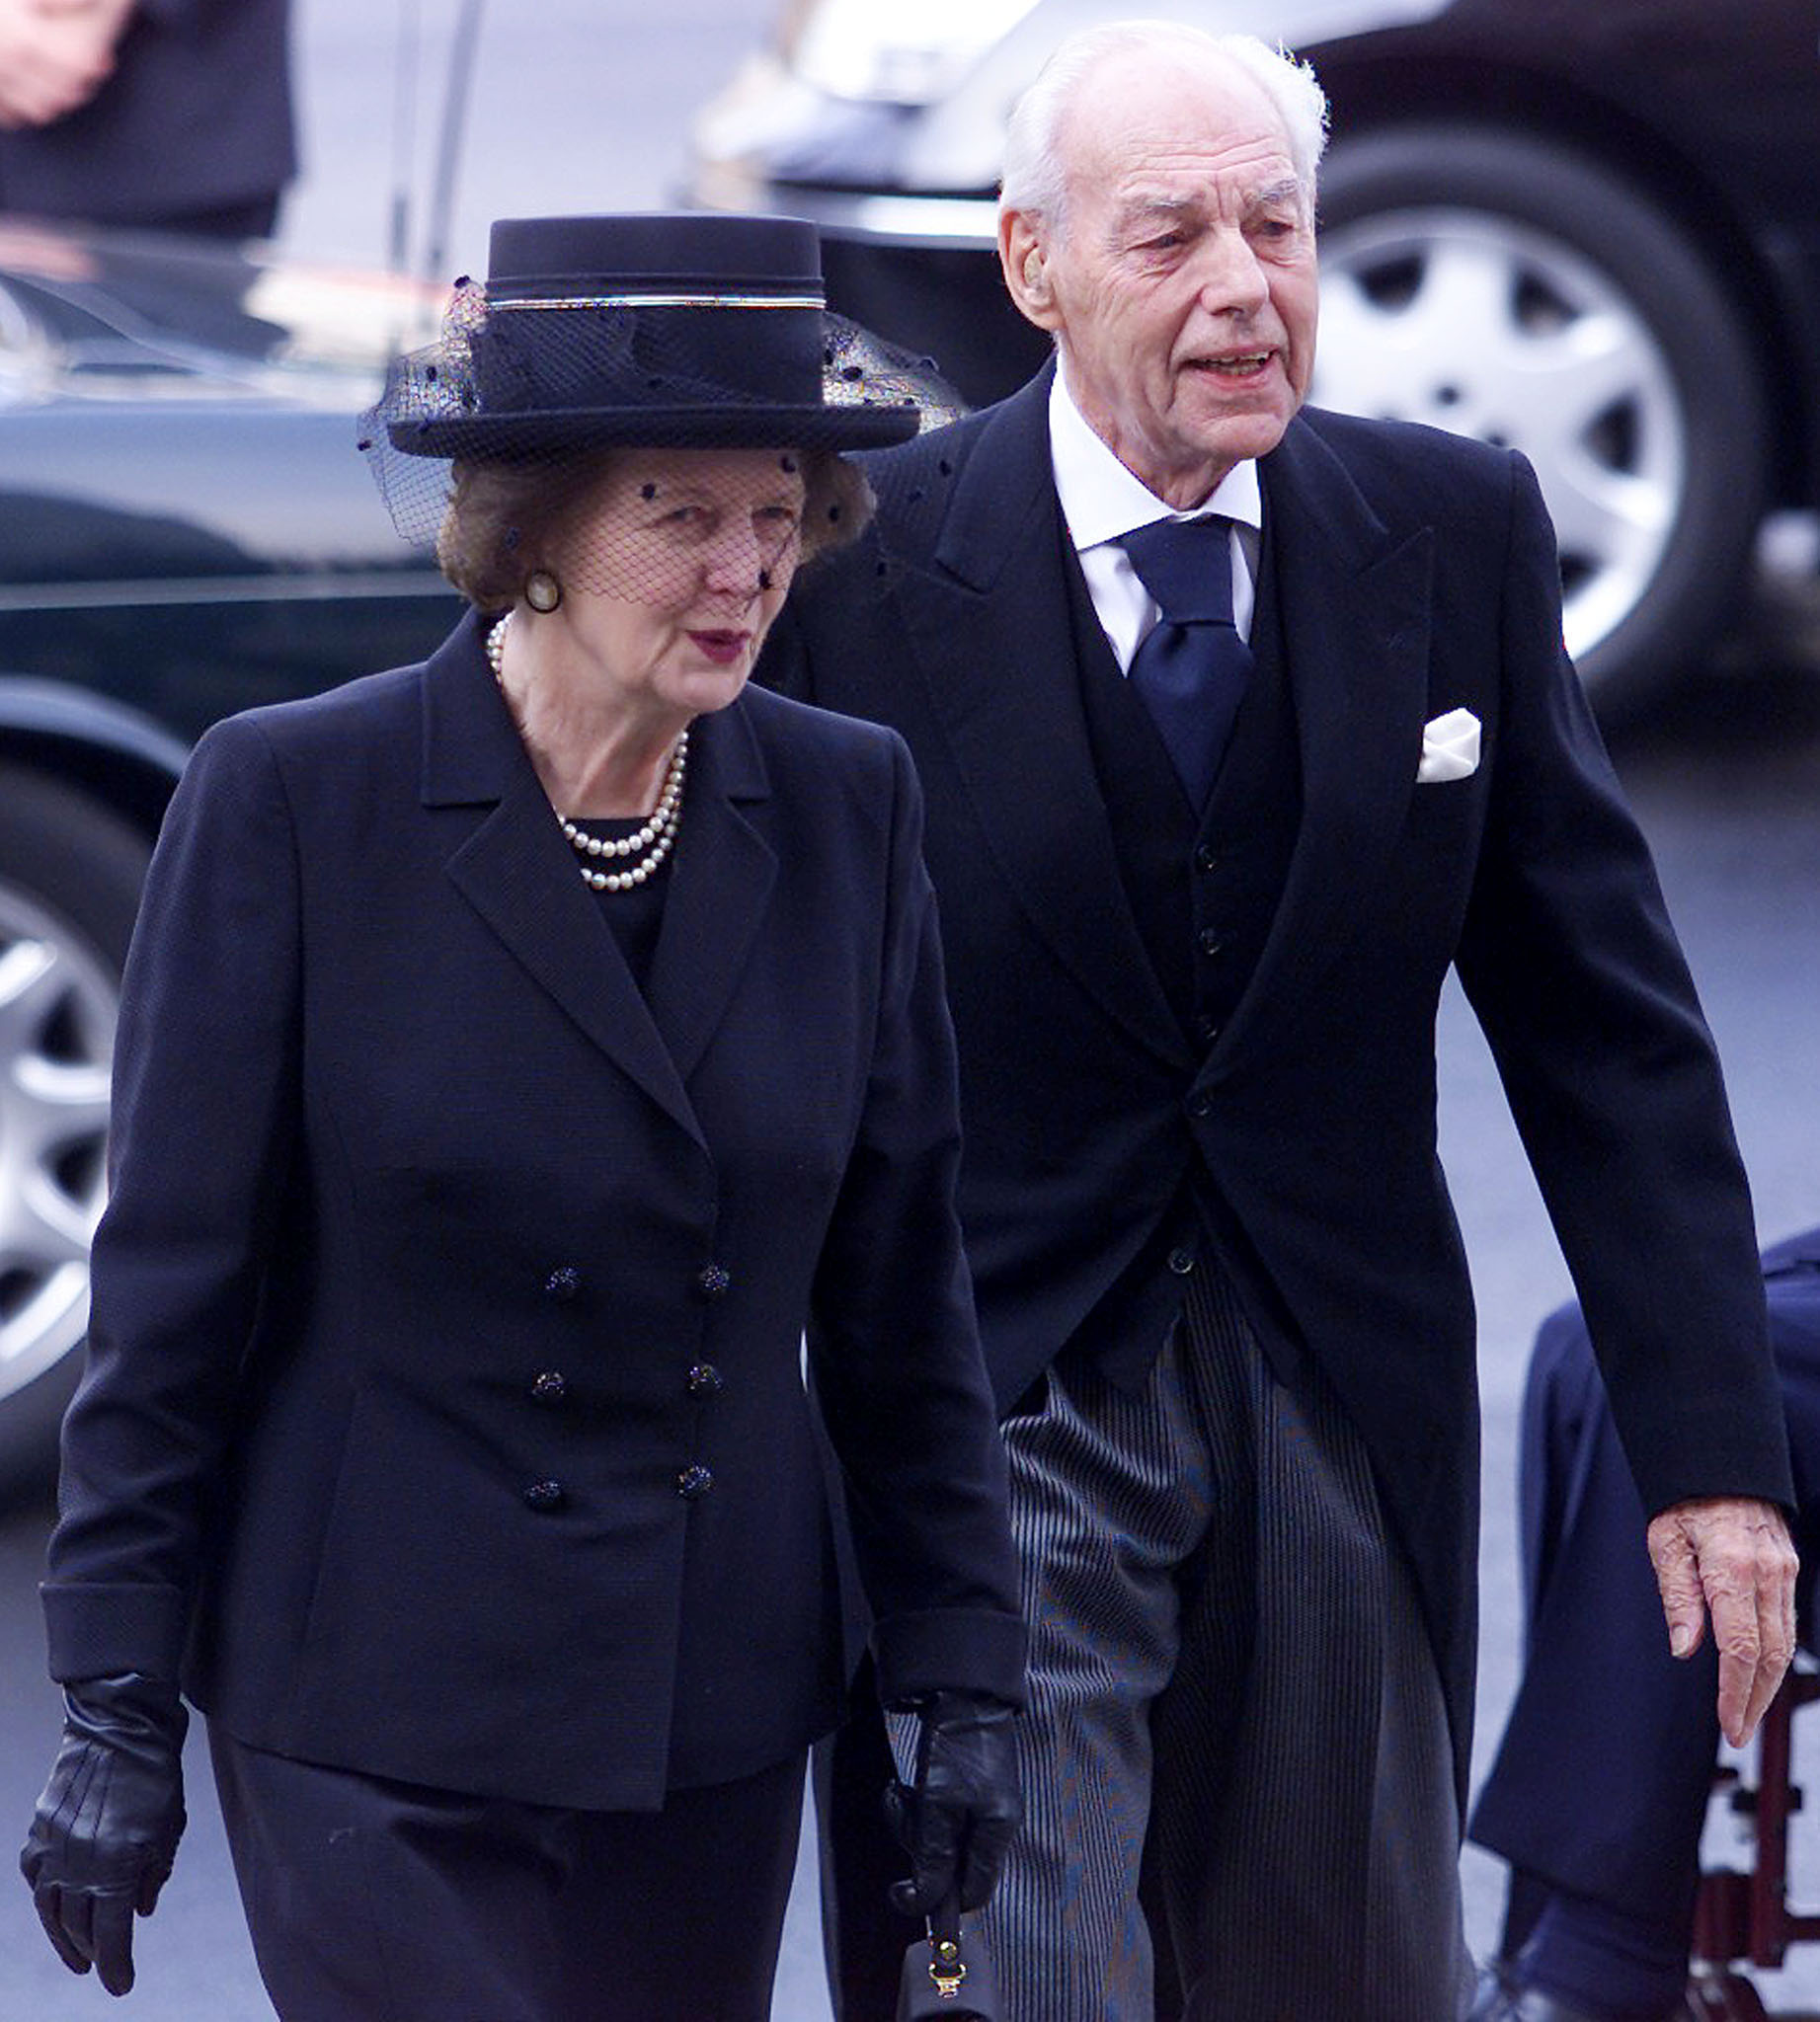 <p>Baroness Margaret Thatcher, a former U.K. prime minister, and husband Dennis Thatcher arrived at London's Westminster Abbey for the funeral of Queen Elizabeth the Queen Mother on April 9, 2002. </p>